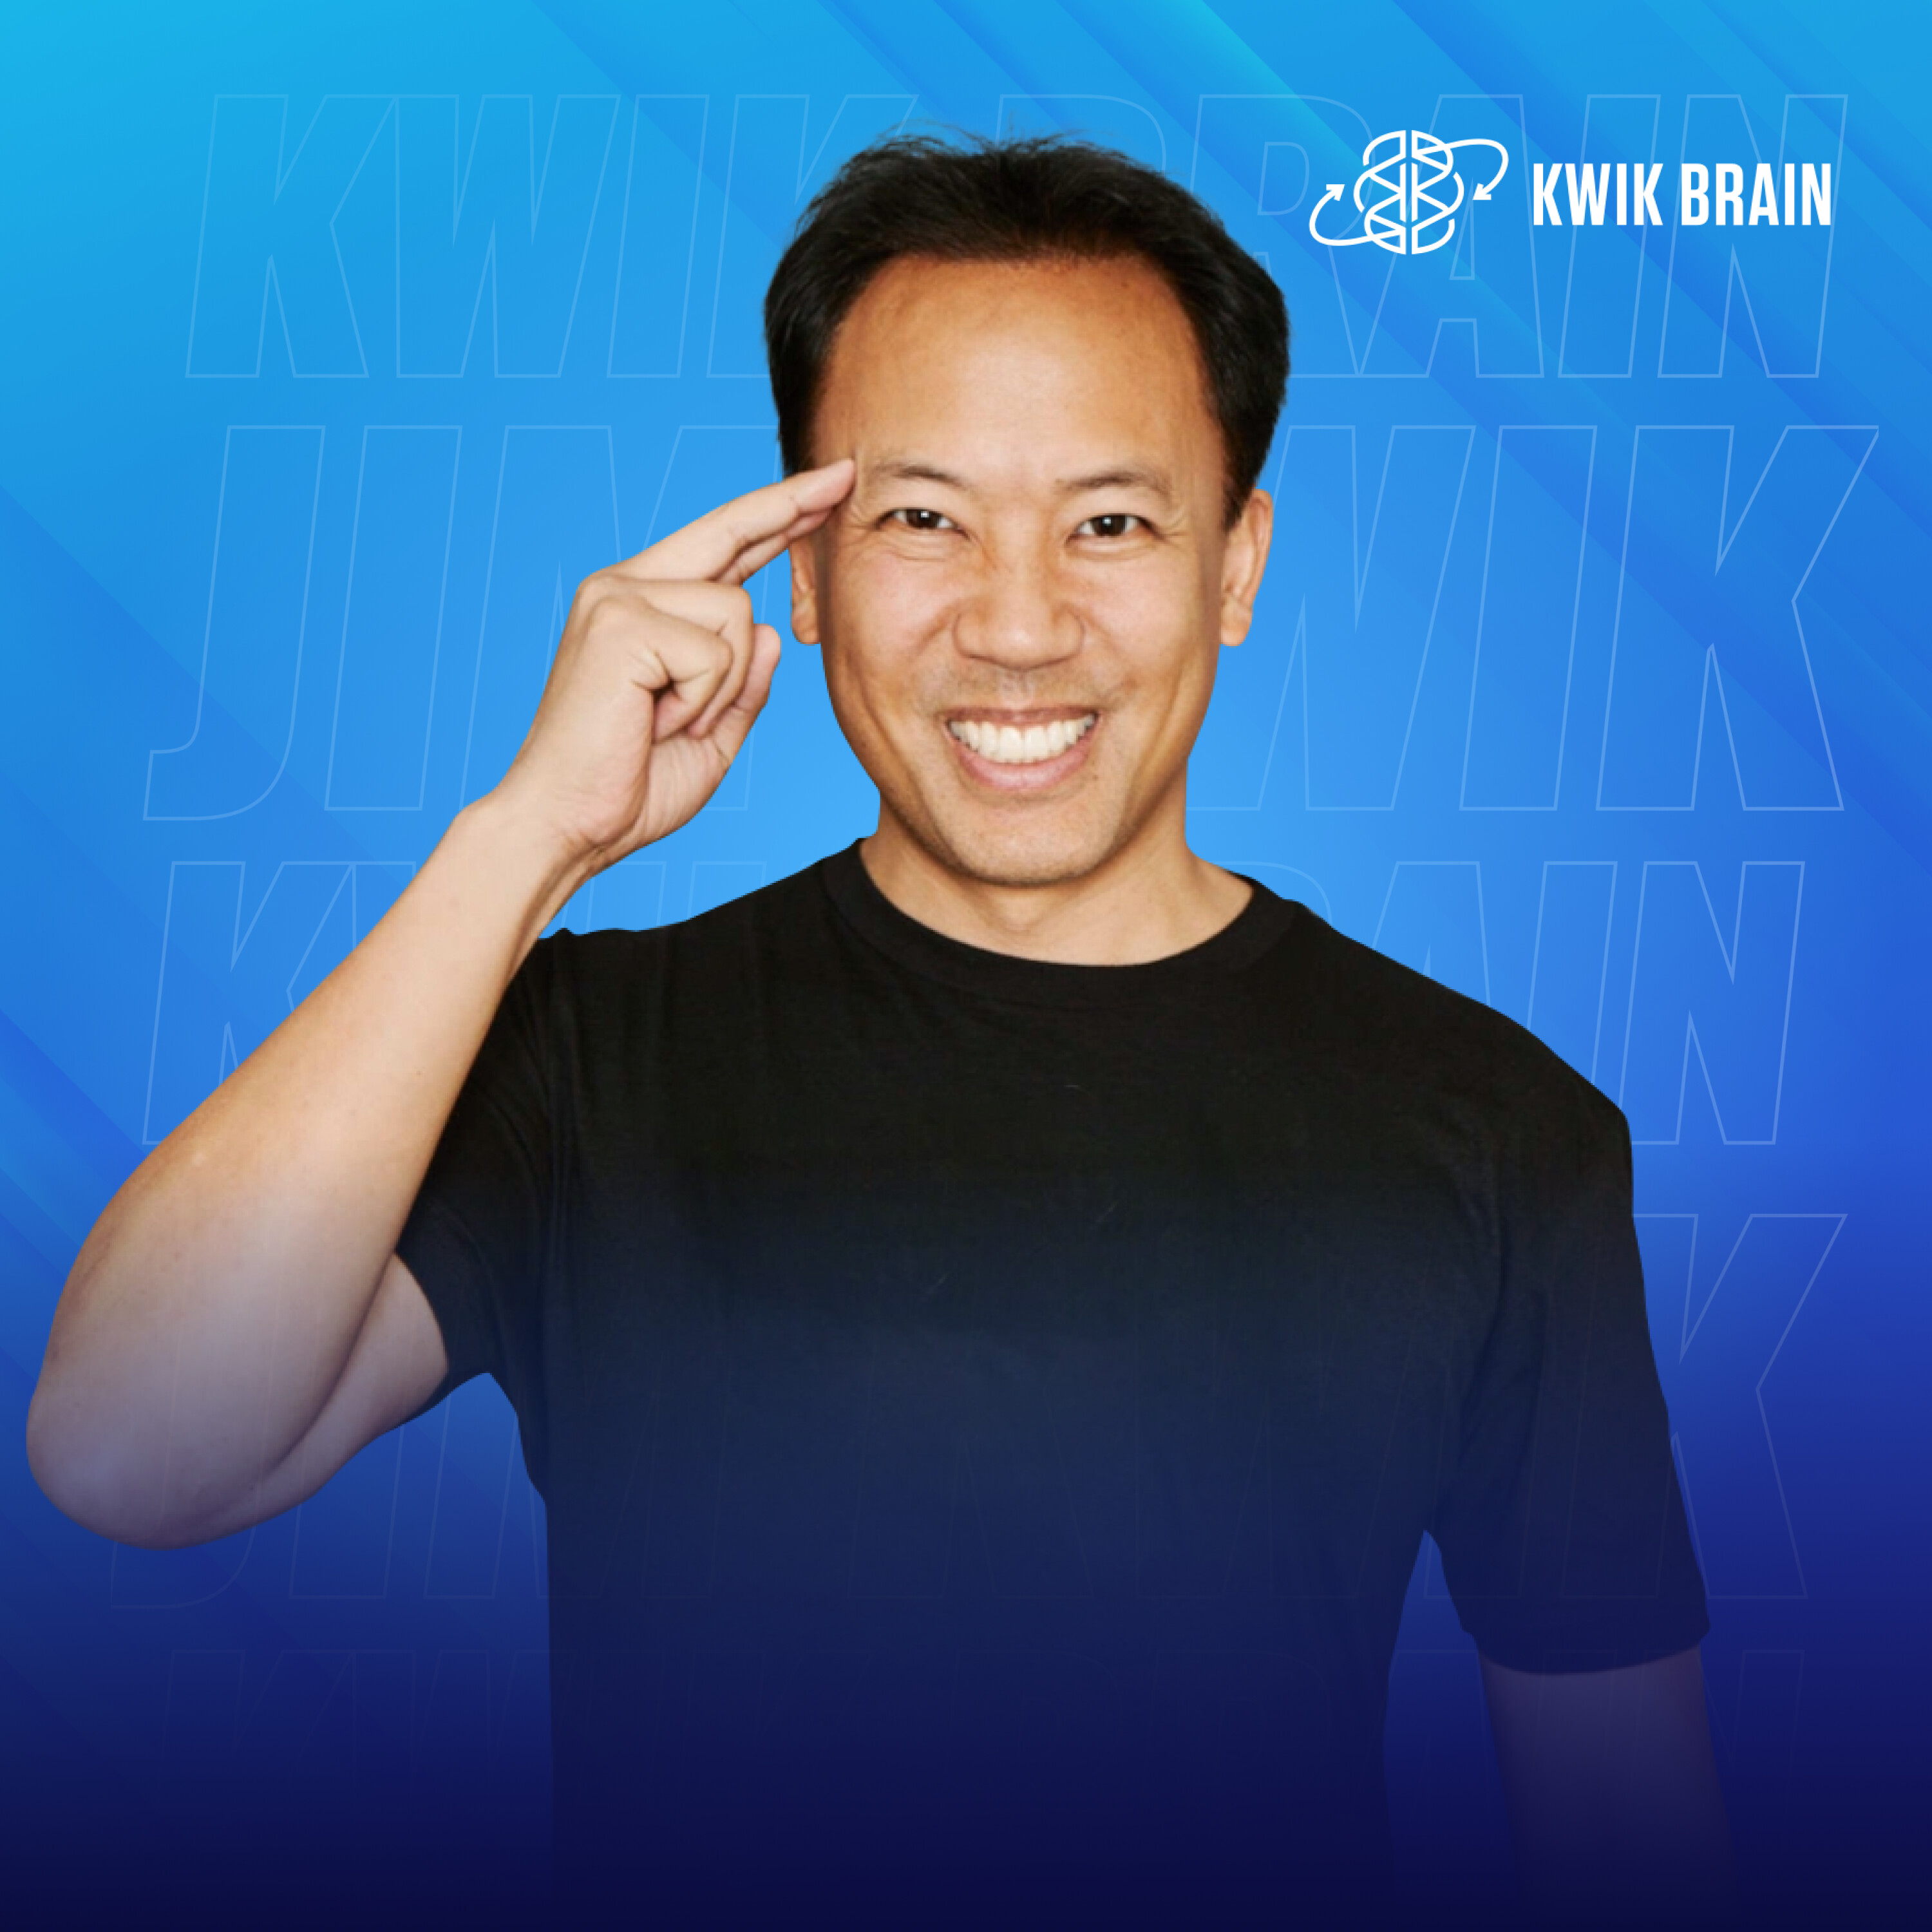 Amplify Your Learning Skills Through Sounds & Music with Jim Kwik